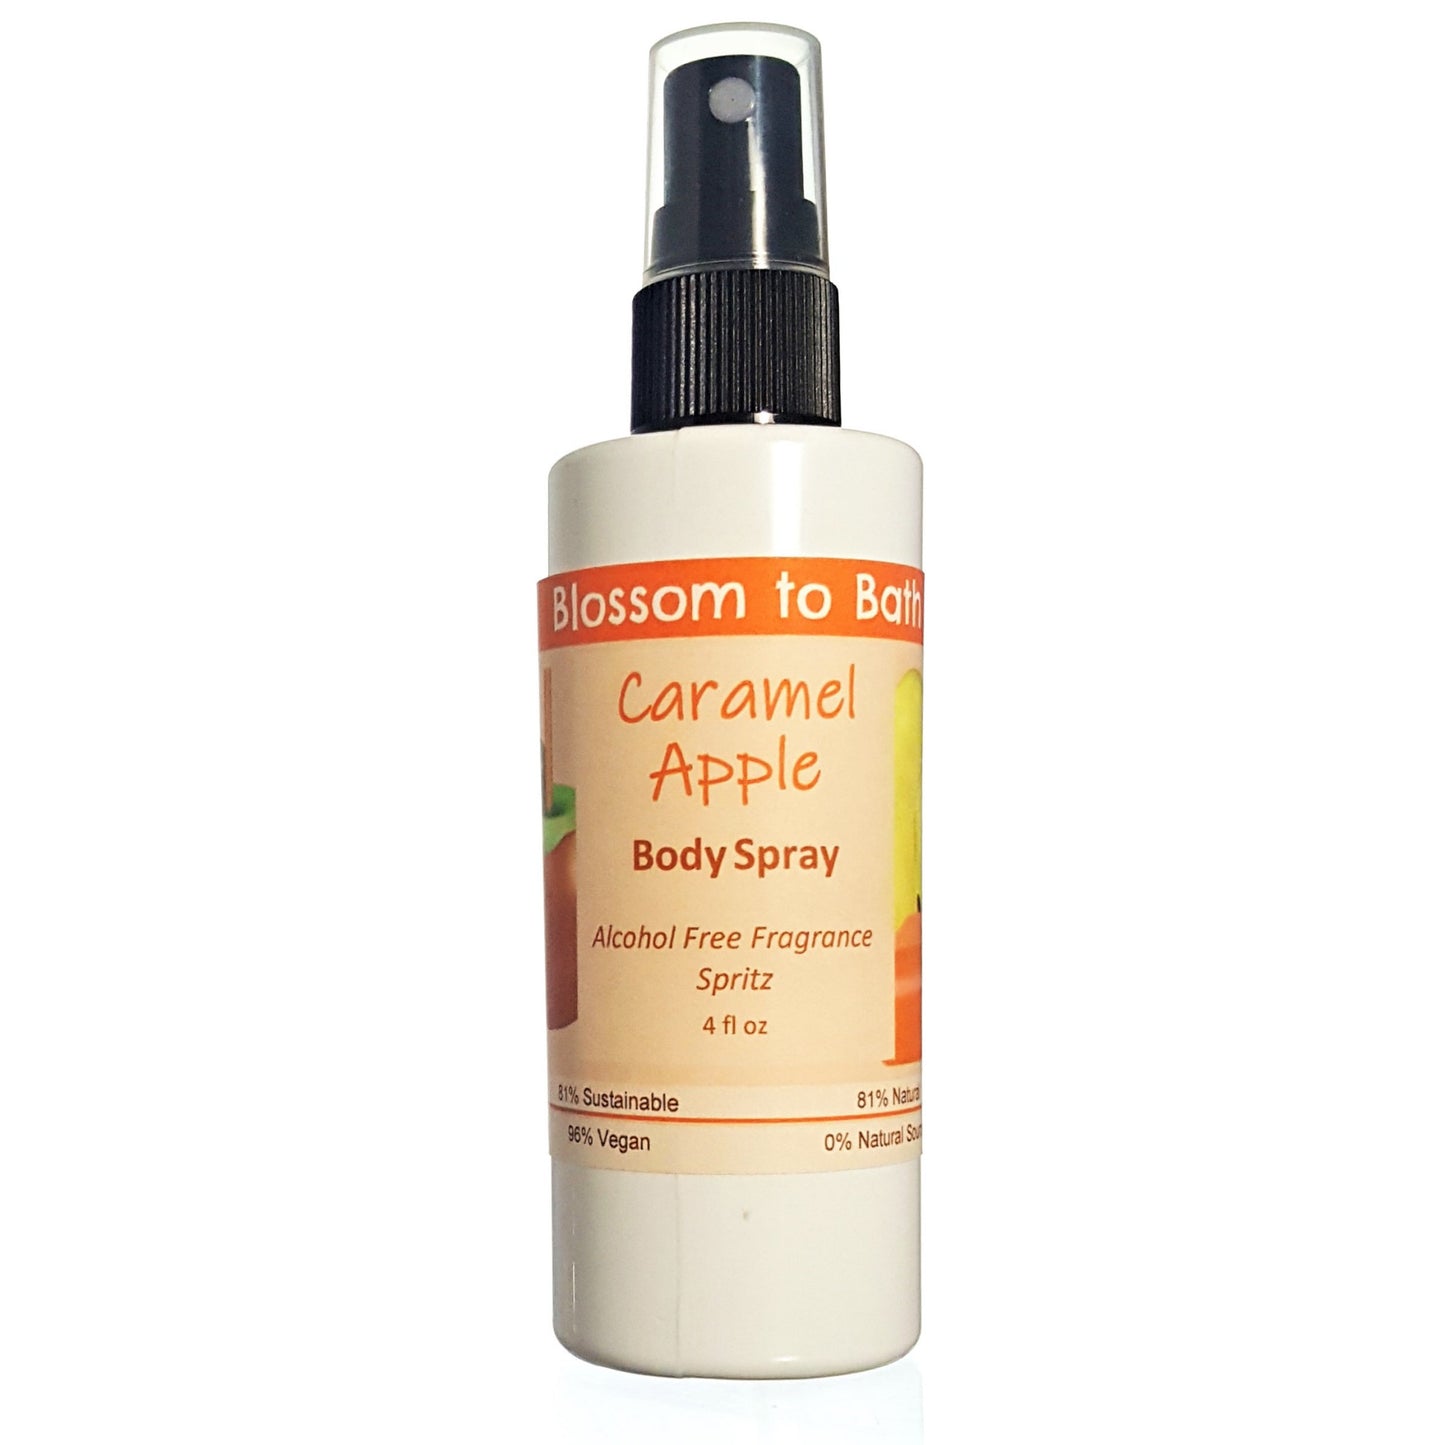 Buy Blossom to Bath Caramel Apple Body Spray from Flowersong Soap Studio.  Natural  freshening of skin, linens, or air  Bright fresh apple and warm rich caramel - a joyful combination of crisp fruit wrapped in decadent sweetness.